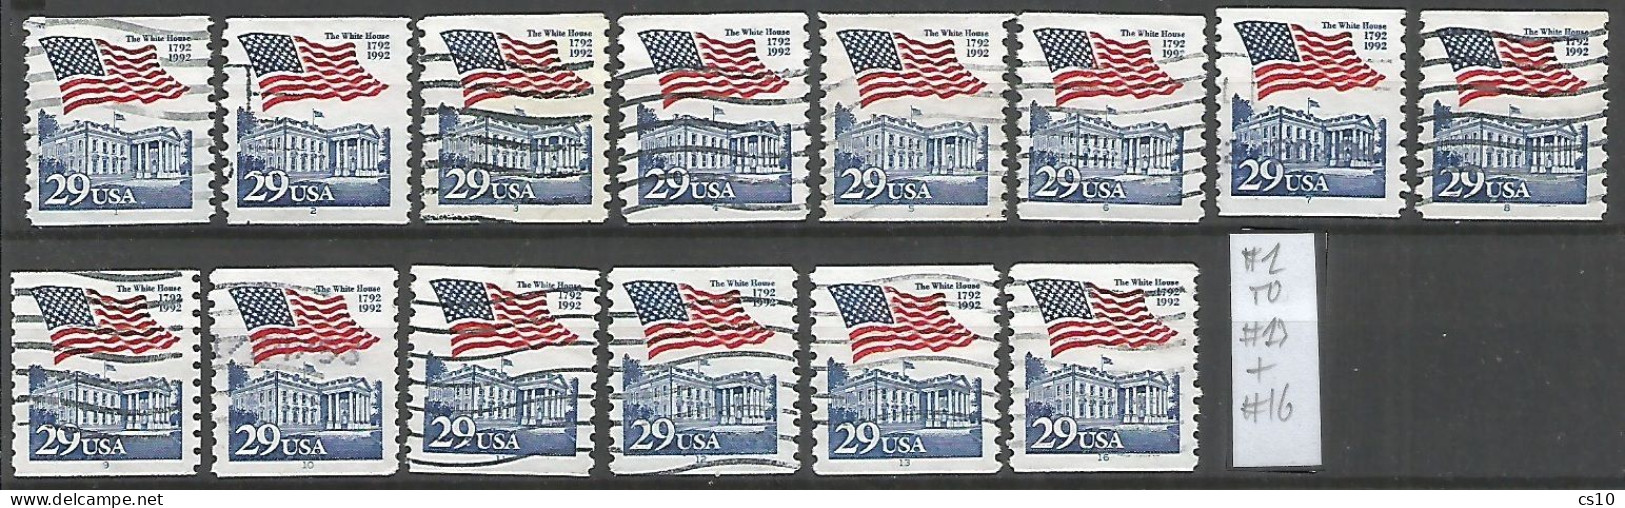 USA 1992 Flag Over White House C.29 COIL Used SC.# 2609 Wide Series Of Plate Numbers From 1 To 13 + 16 !!! - Rollenmarken